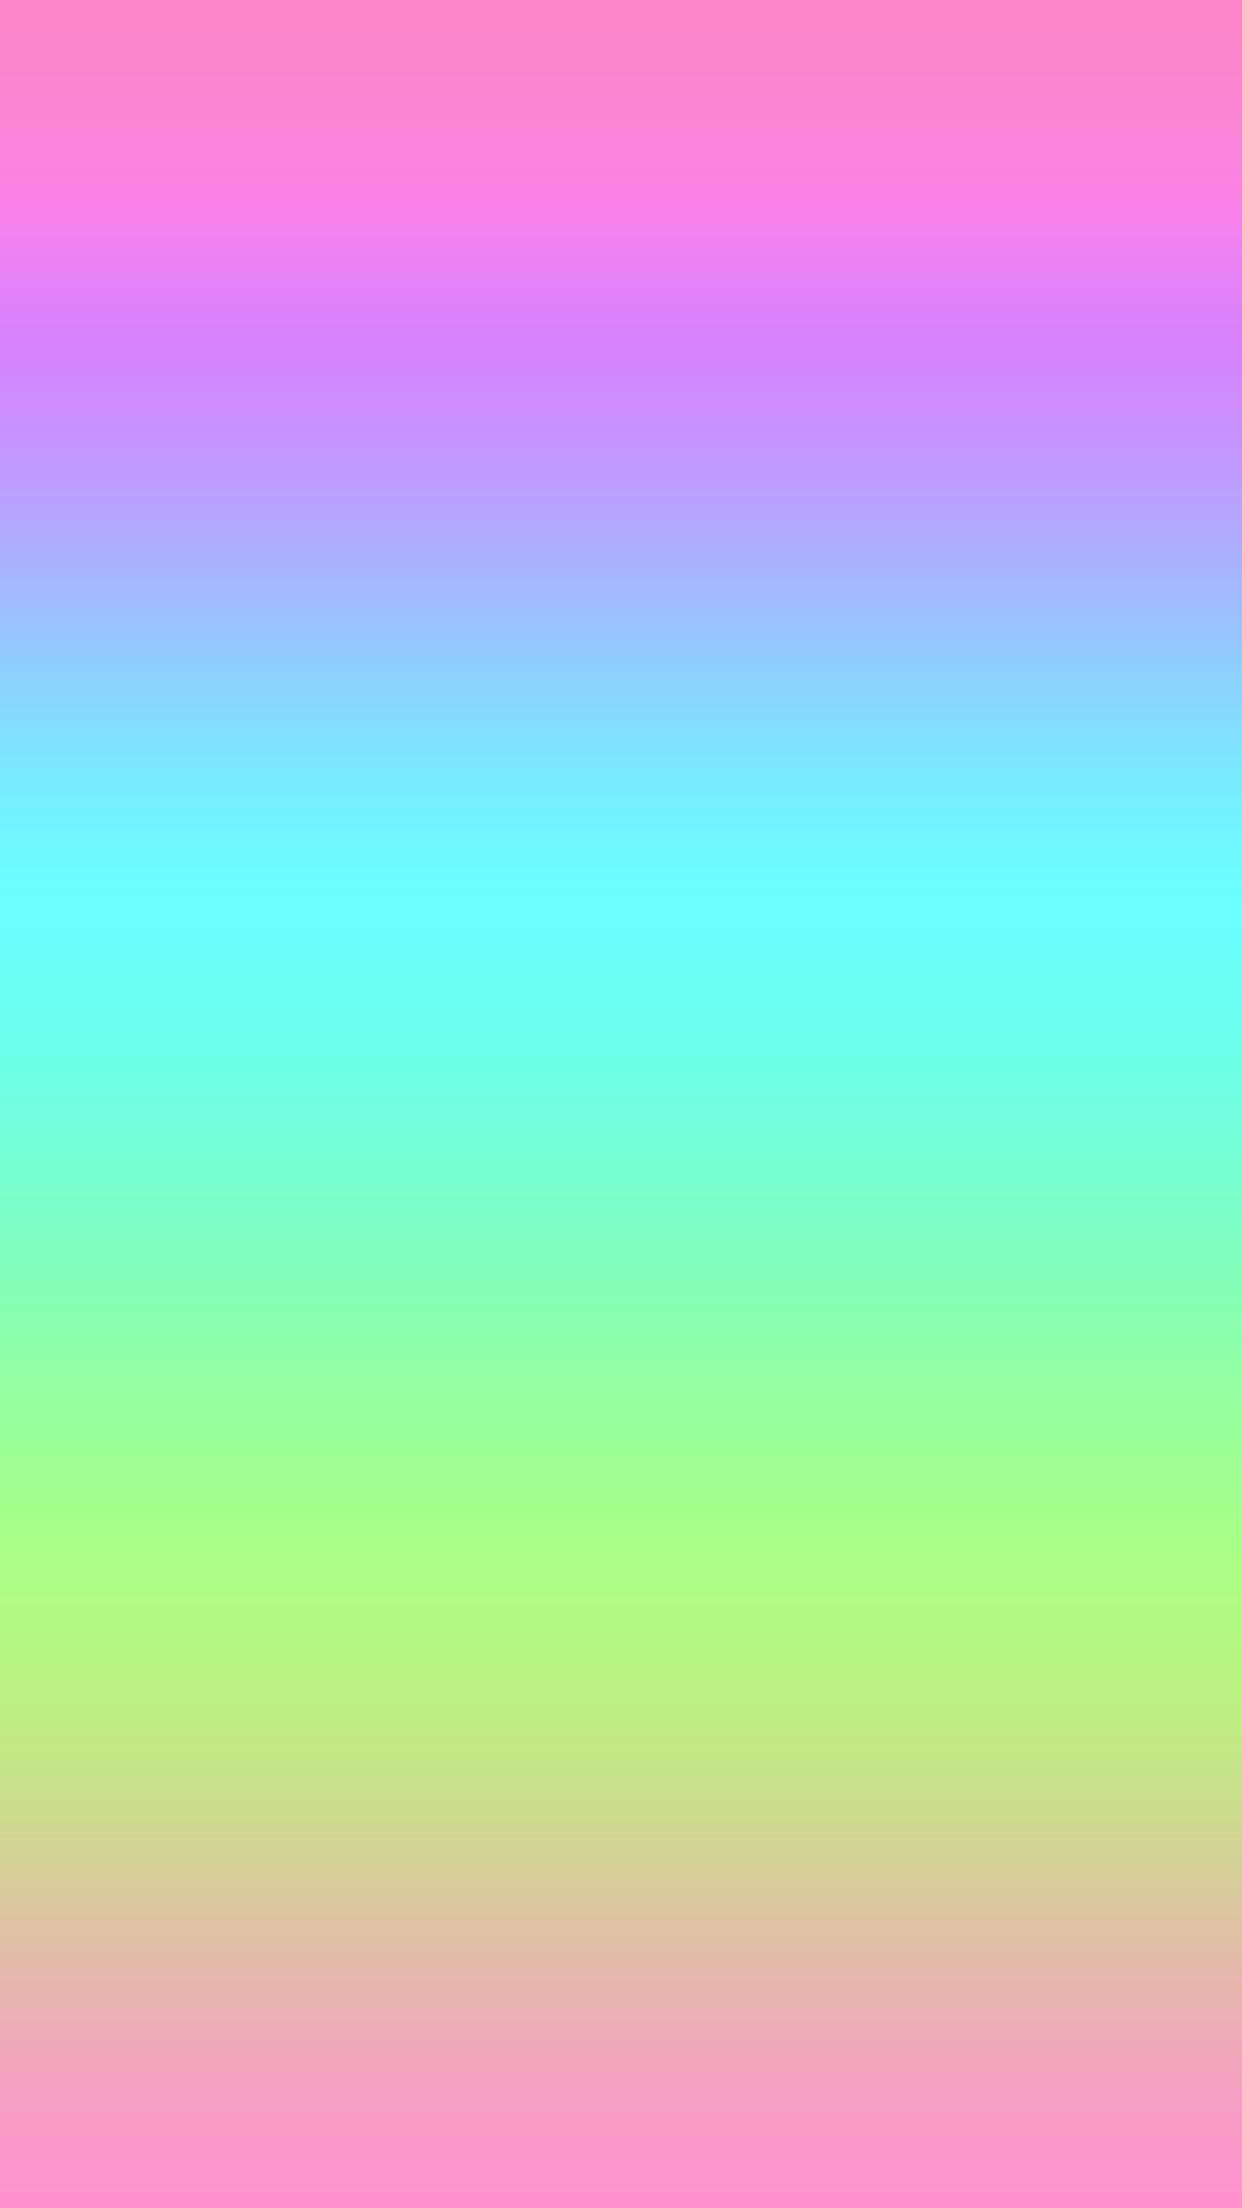 A colorful background with pink, green and blue - Pastel rainbow